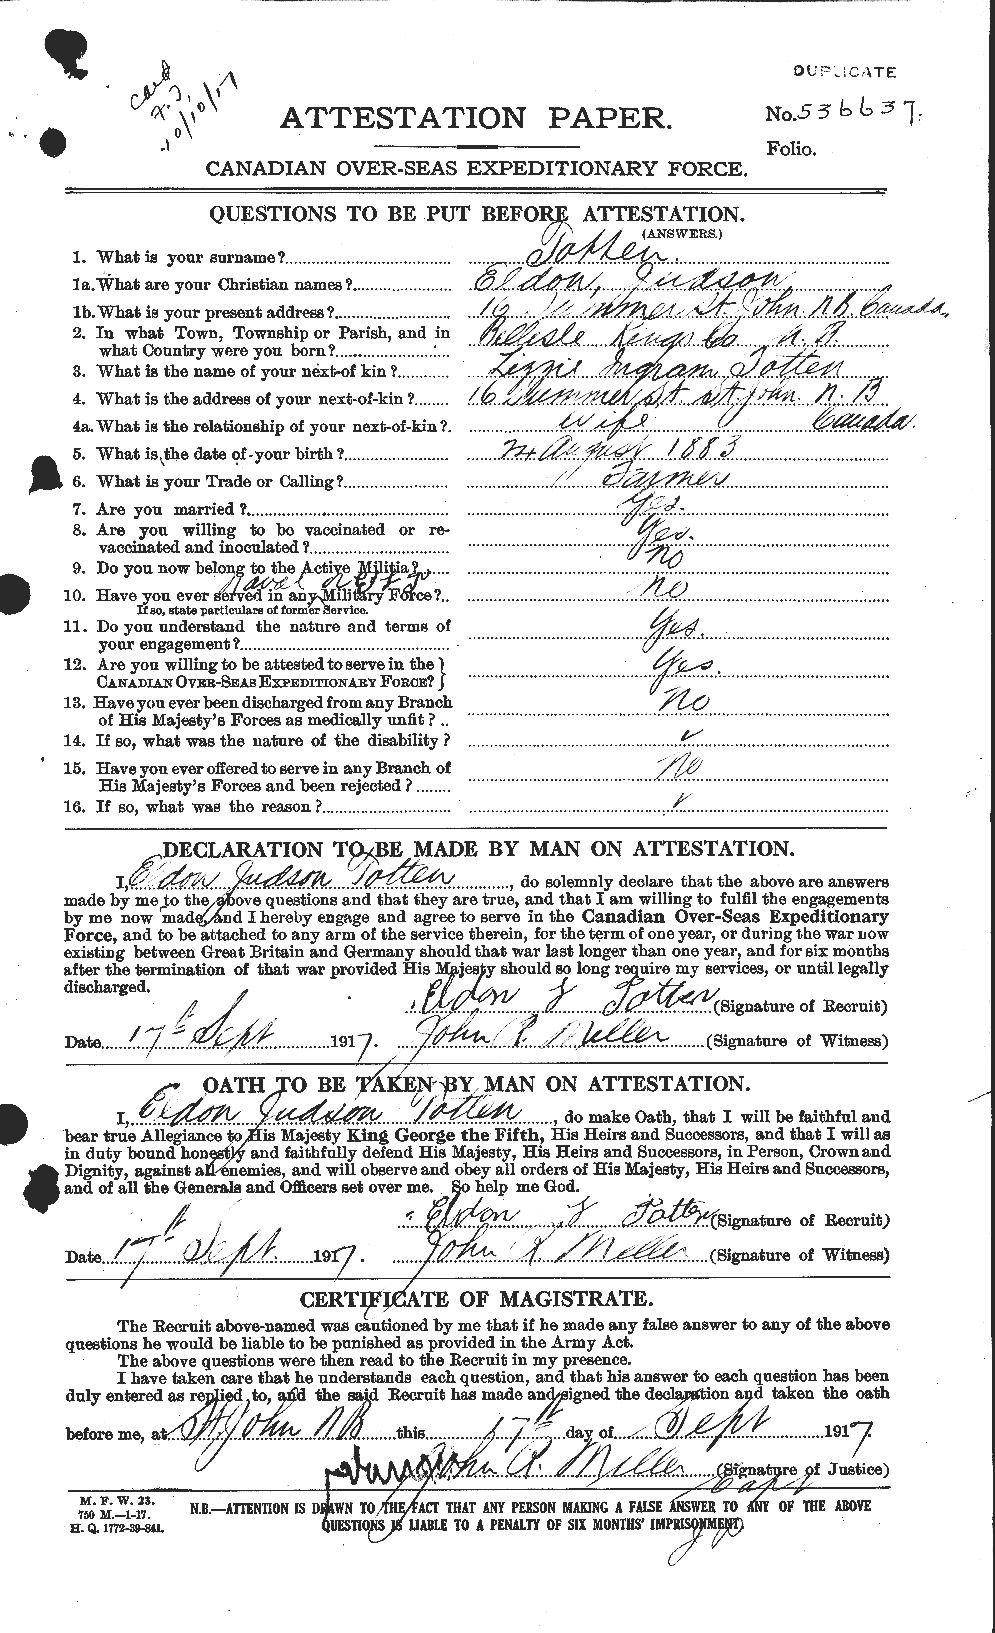 Personnel Records of the First World War - CEF 650066a